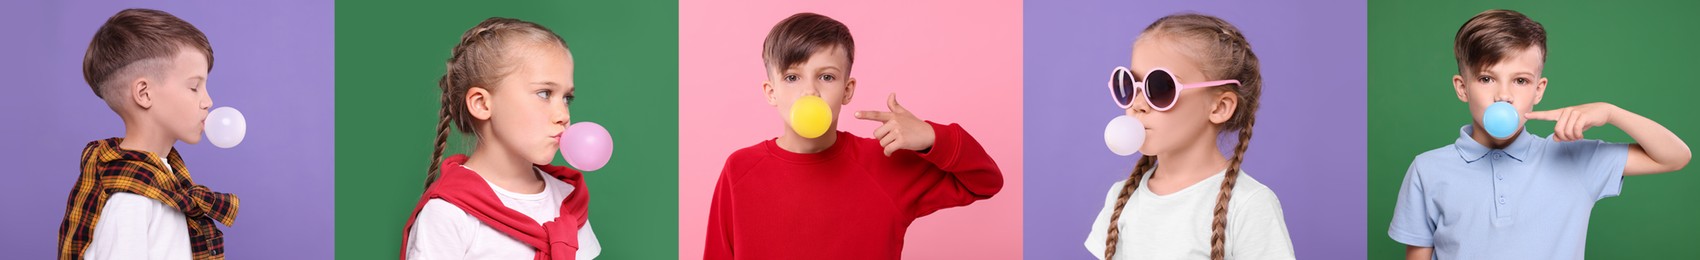 Image of Cute children blowing bubble gums on color backgrounds, set of photos